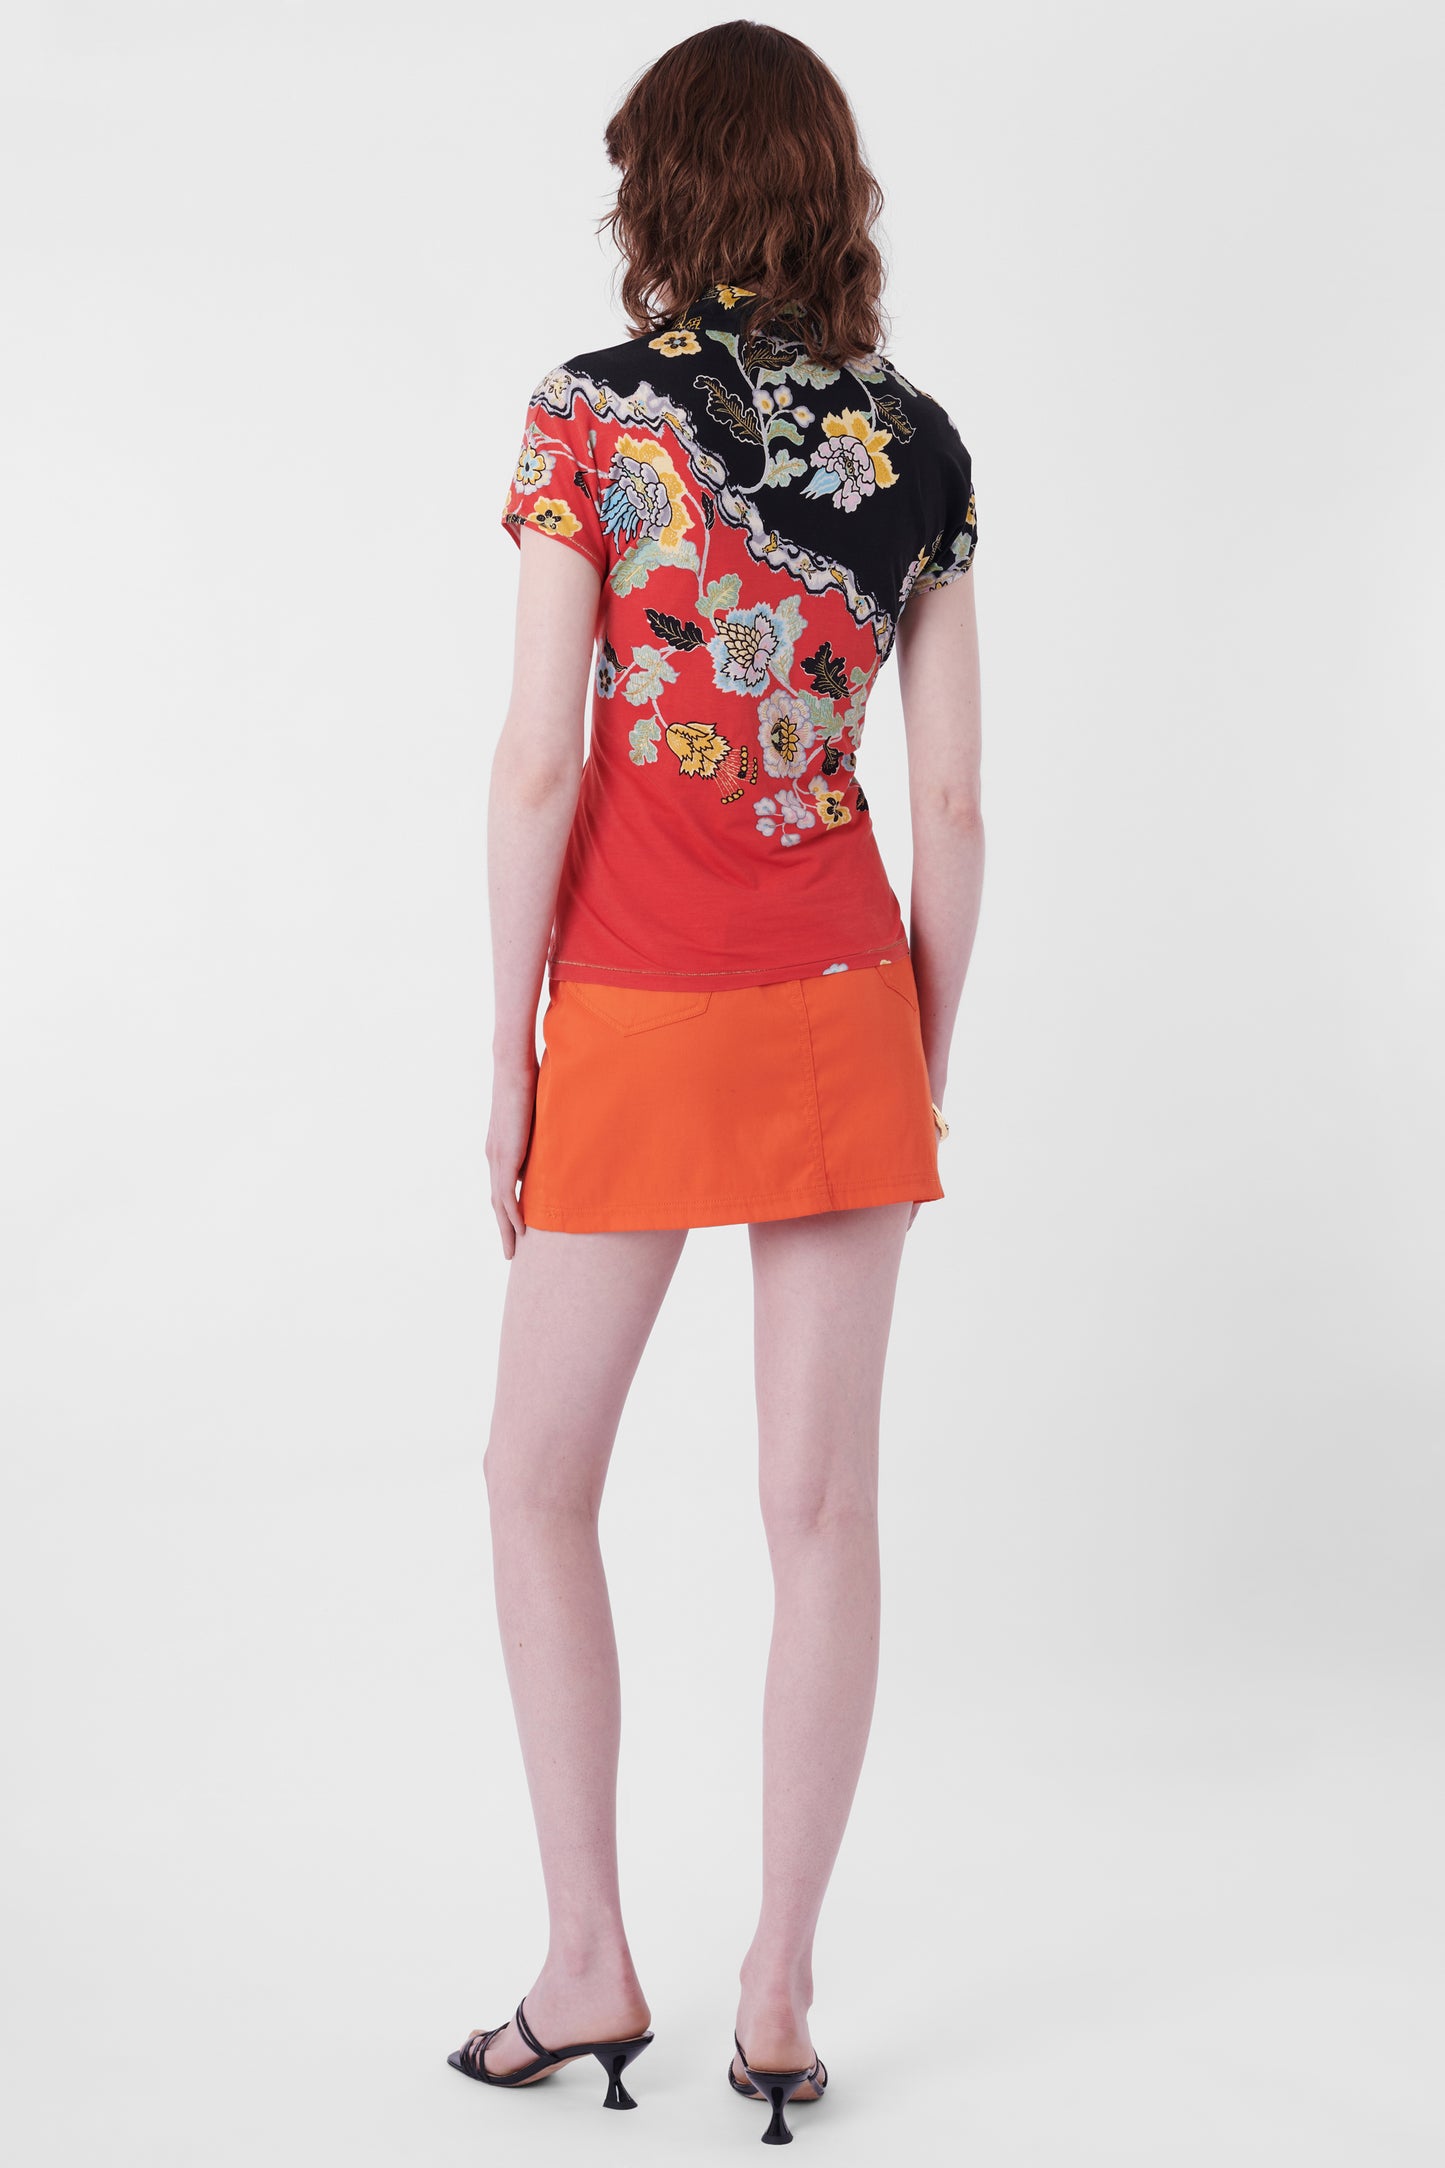 Vintage S/S 2003 Chinoiserie Short Sleeve Top